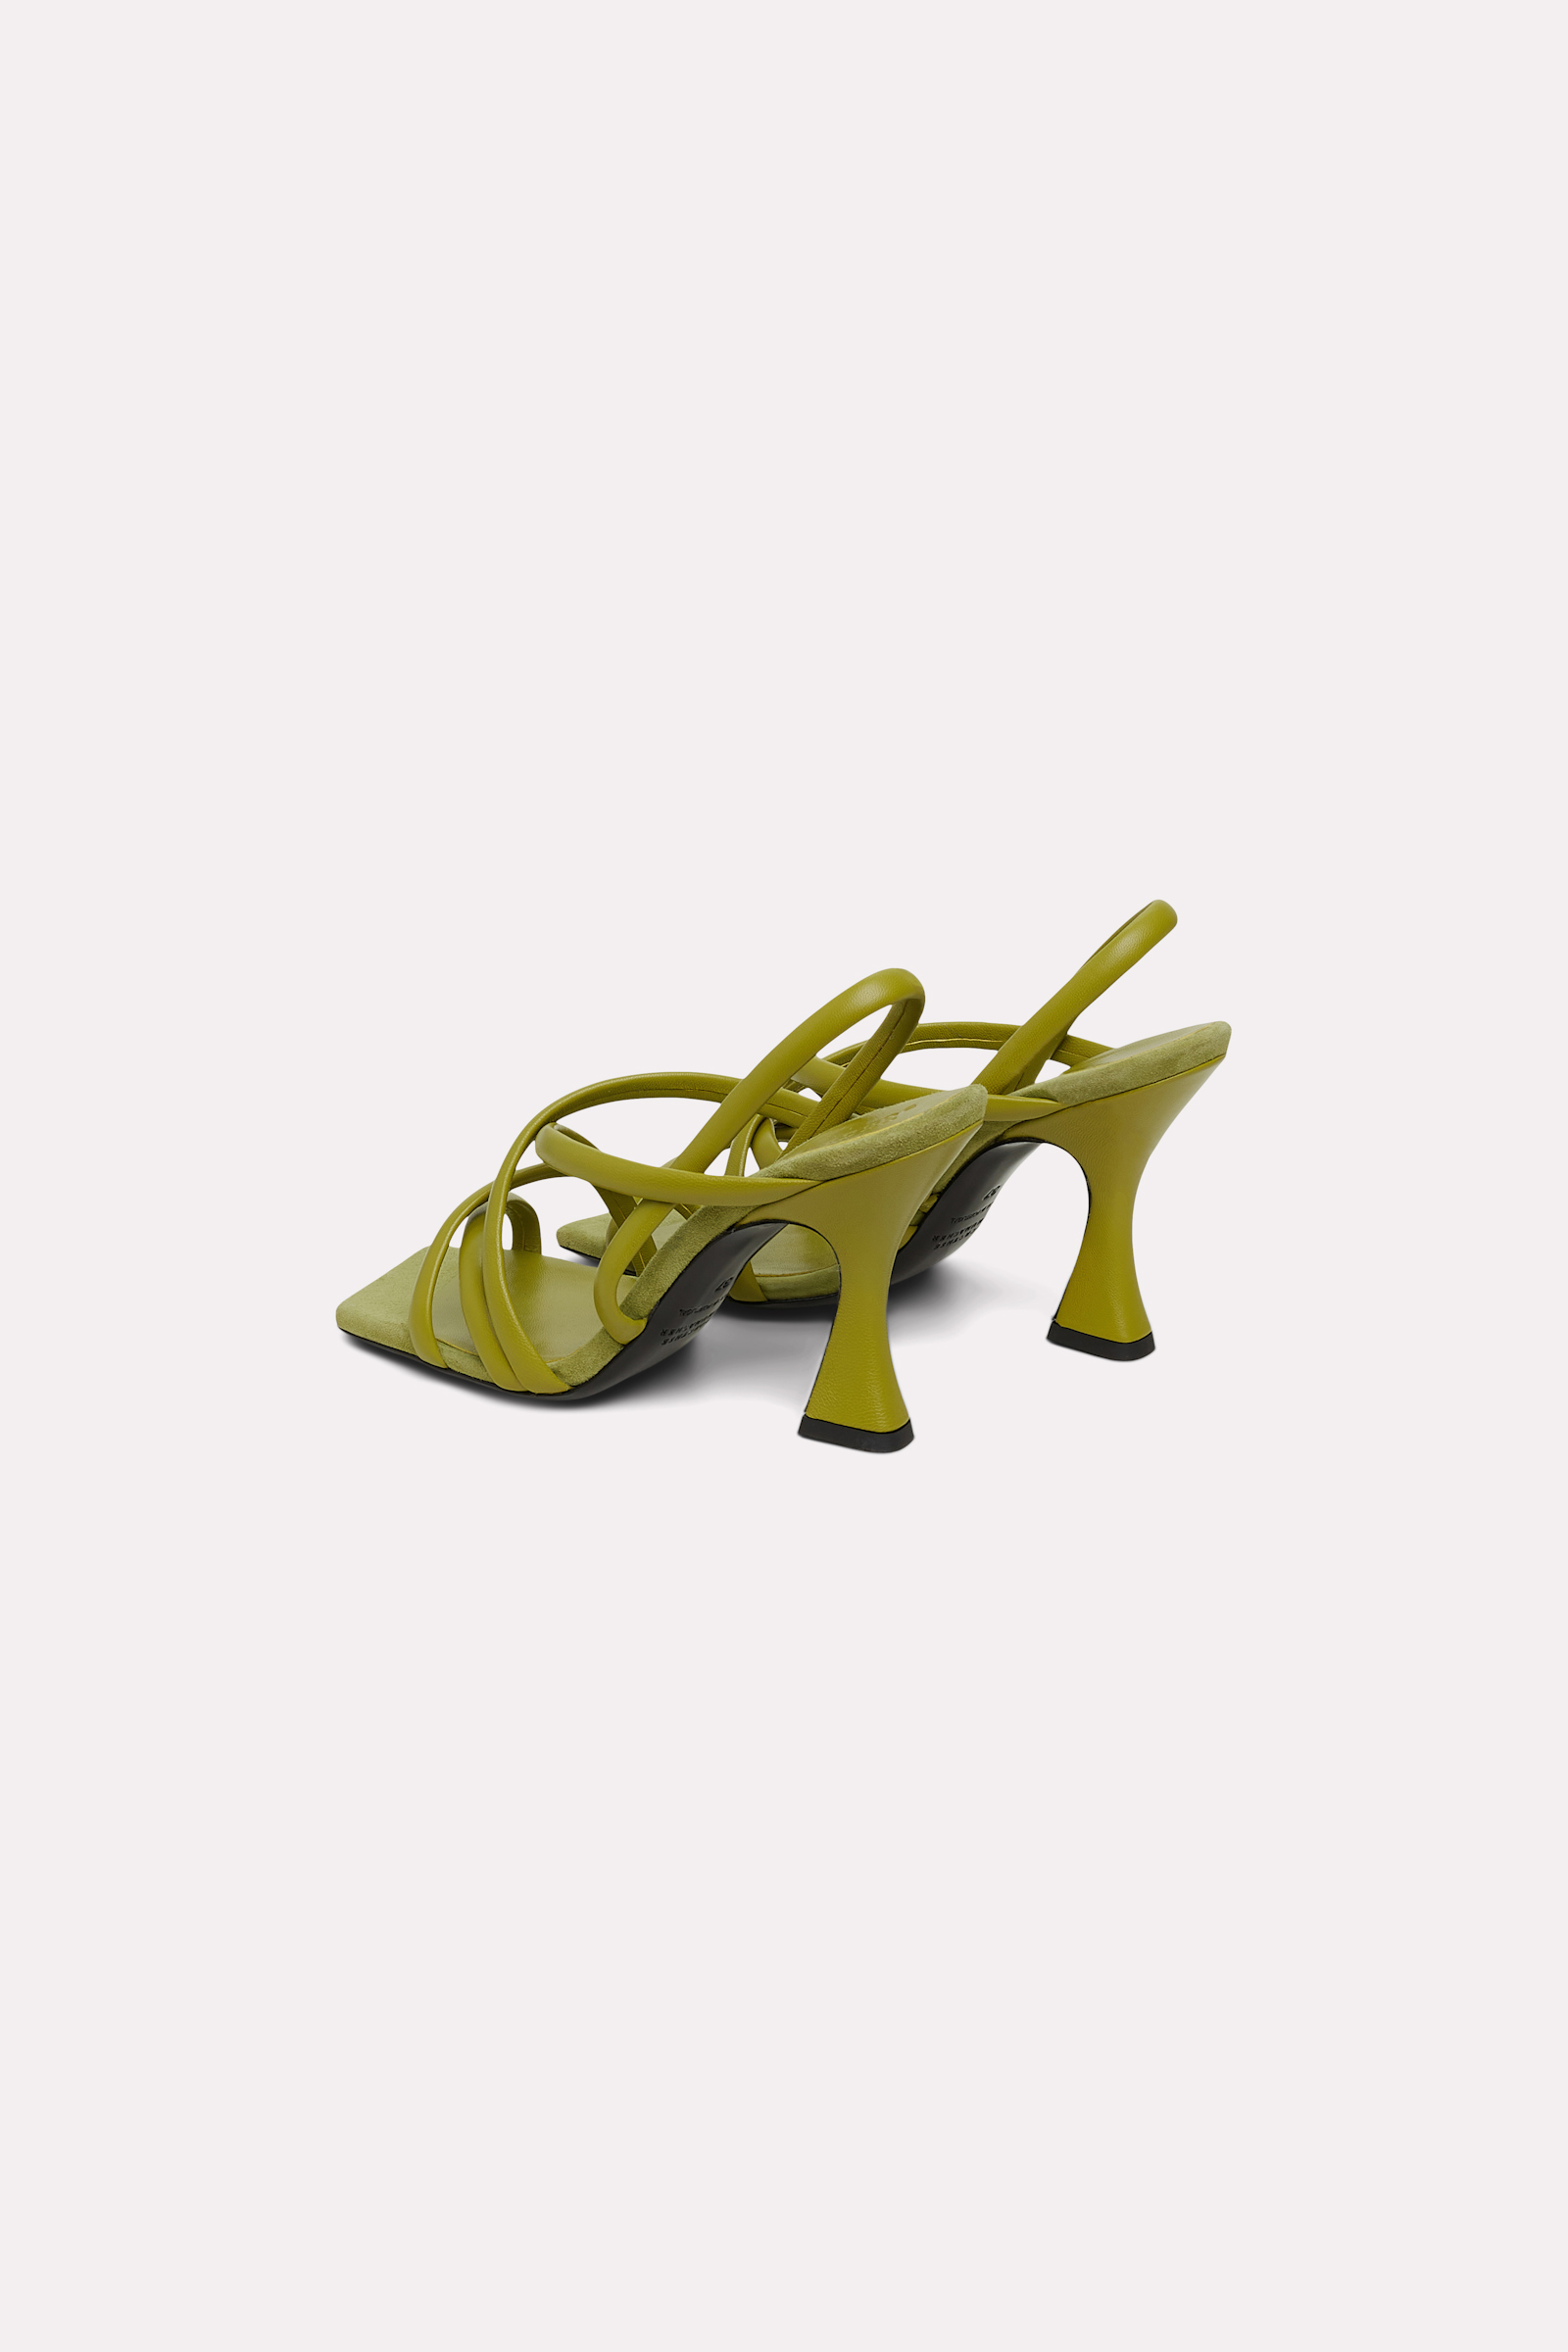 Dorothee Schumacher Puffed leather sandals with louis heel moss green